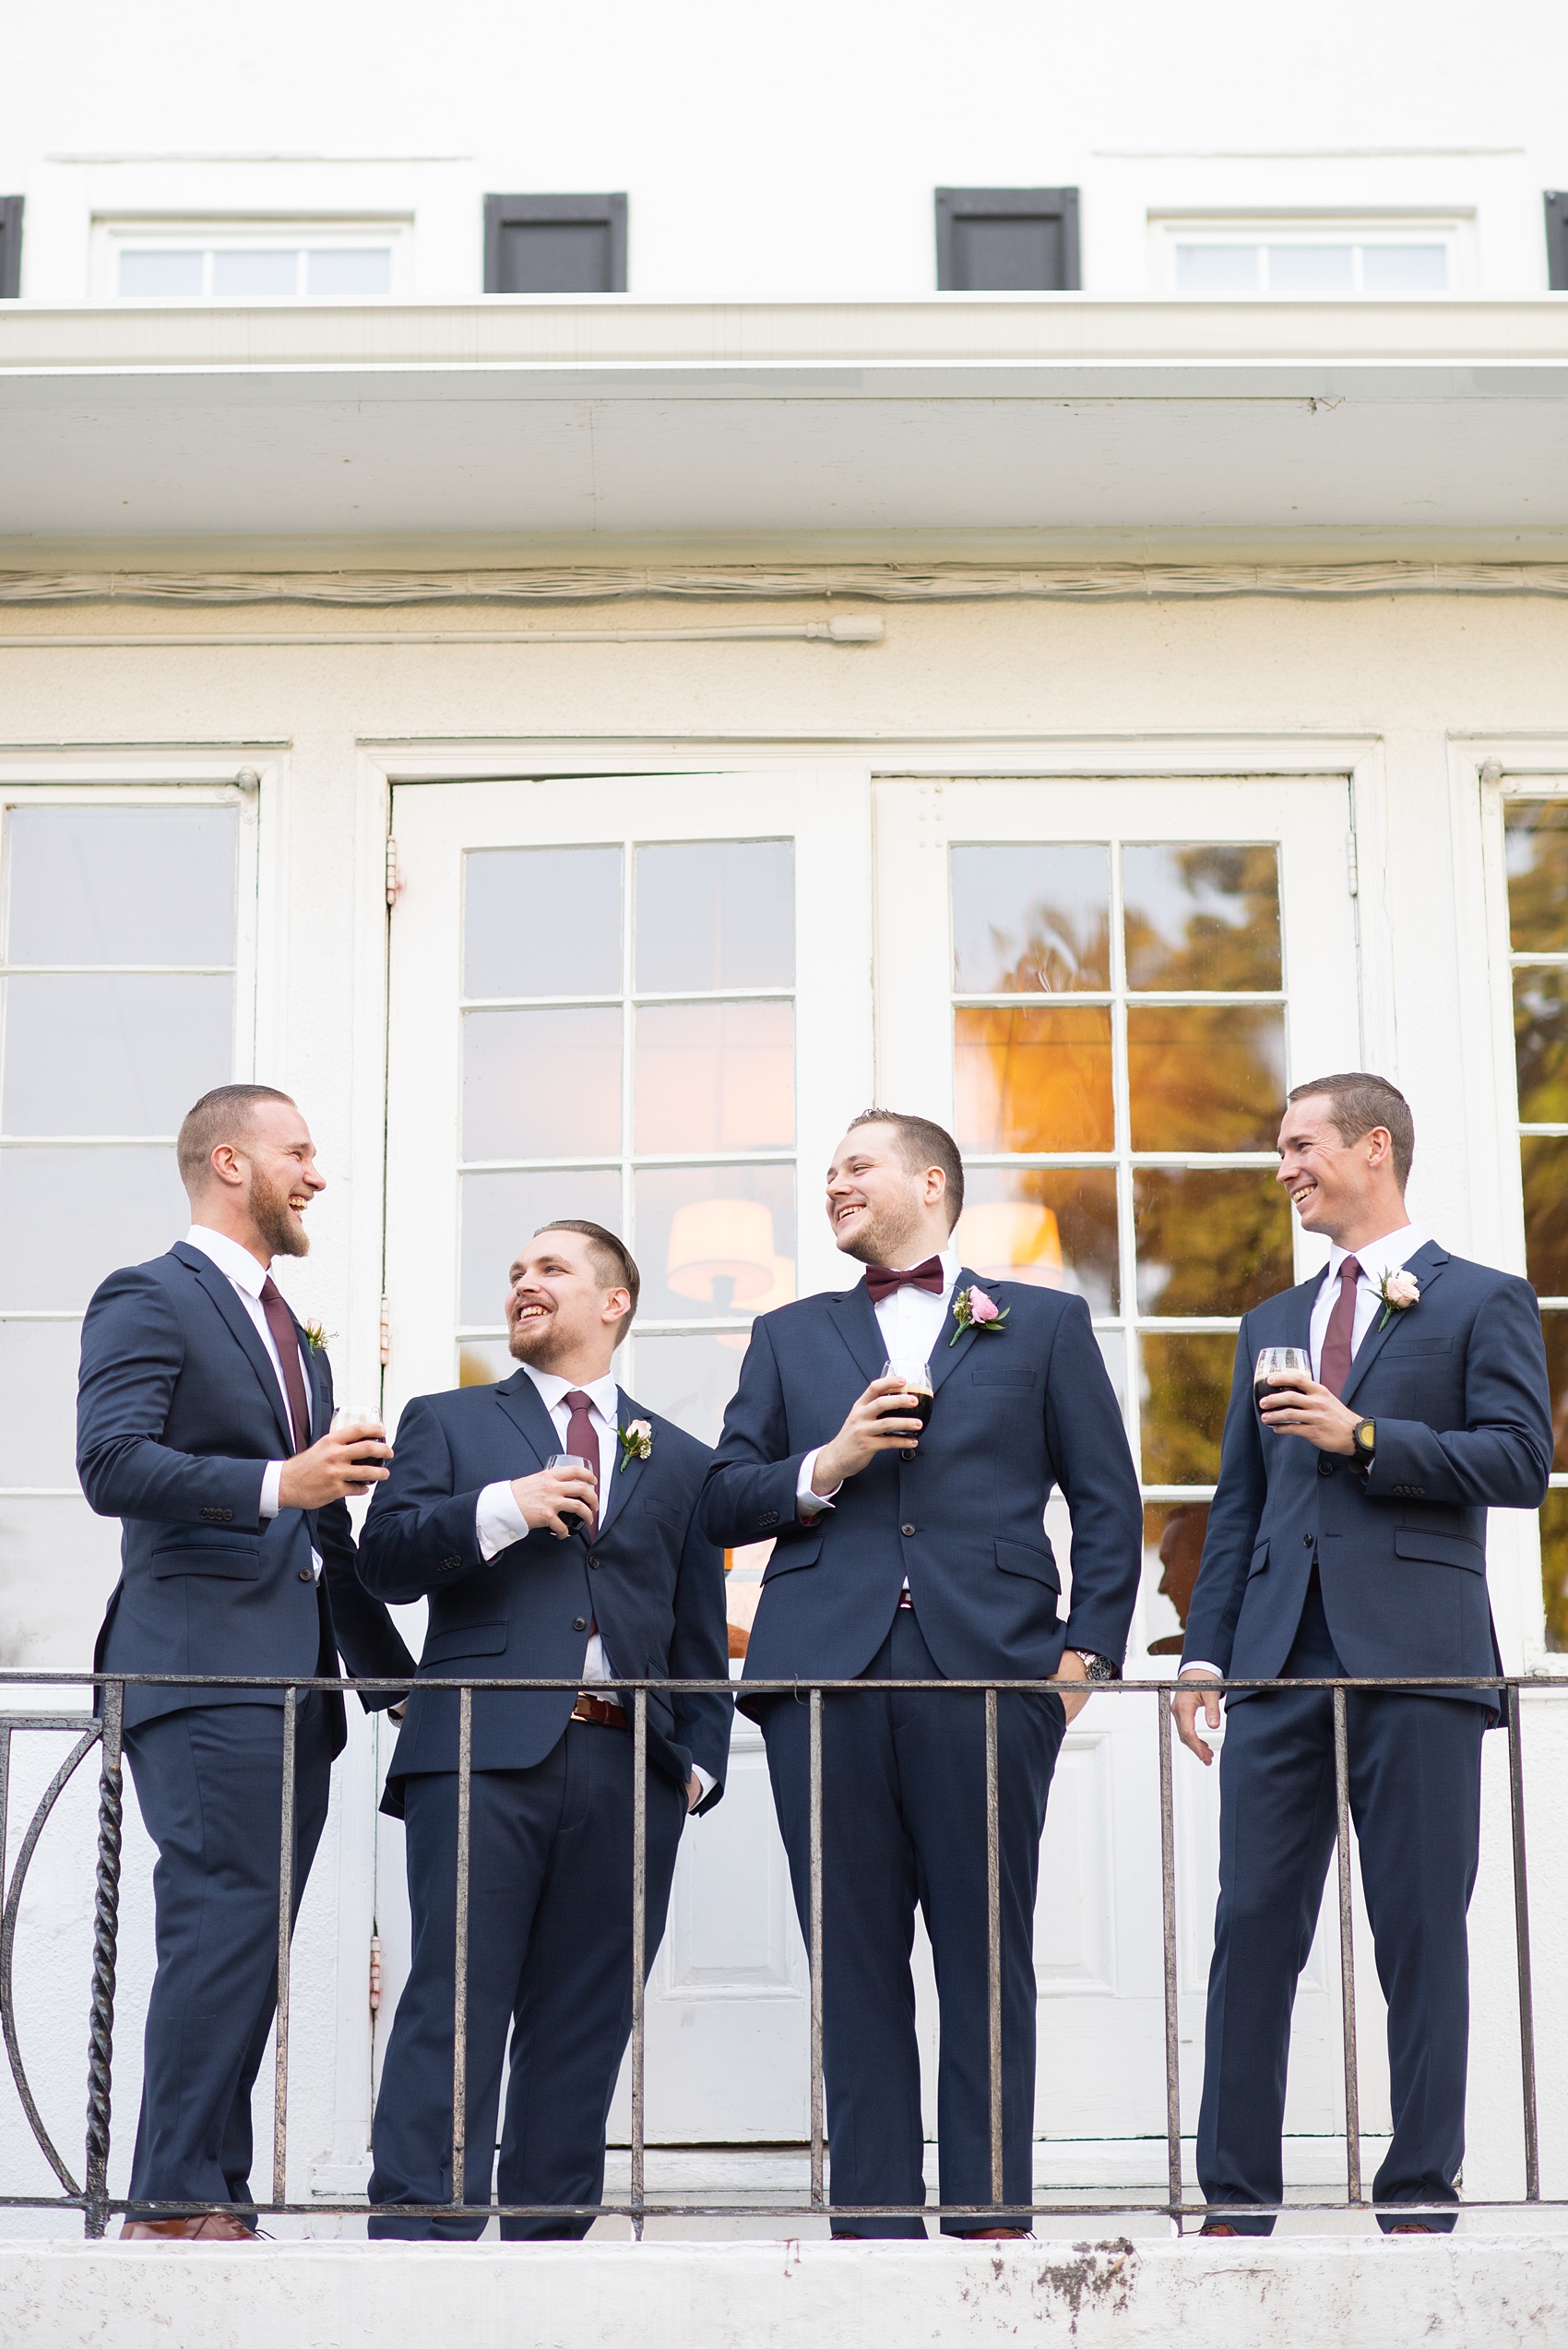 Wedding photos at Crabtree's Kittle House in Chappaqua, New York by Mikkel Paige Photography. This venue in Westchester county was the perfect place to capture their groomsmen photos in a country setting, with the groomsmen in custom navy blue suits with burgundy ties. The historic home is very close to NYC. Click through for more fall wedding inspiration from their day! #bluesuit #mikkelpaige #CrabtreesKittleHouse #WestchesterWeddingVenues #WestchesterWedding #SeptemberWedding #weddingparty #groomsmen #navysuits #customsuits #groom